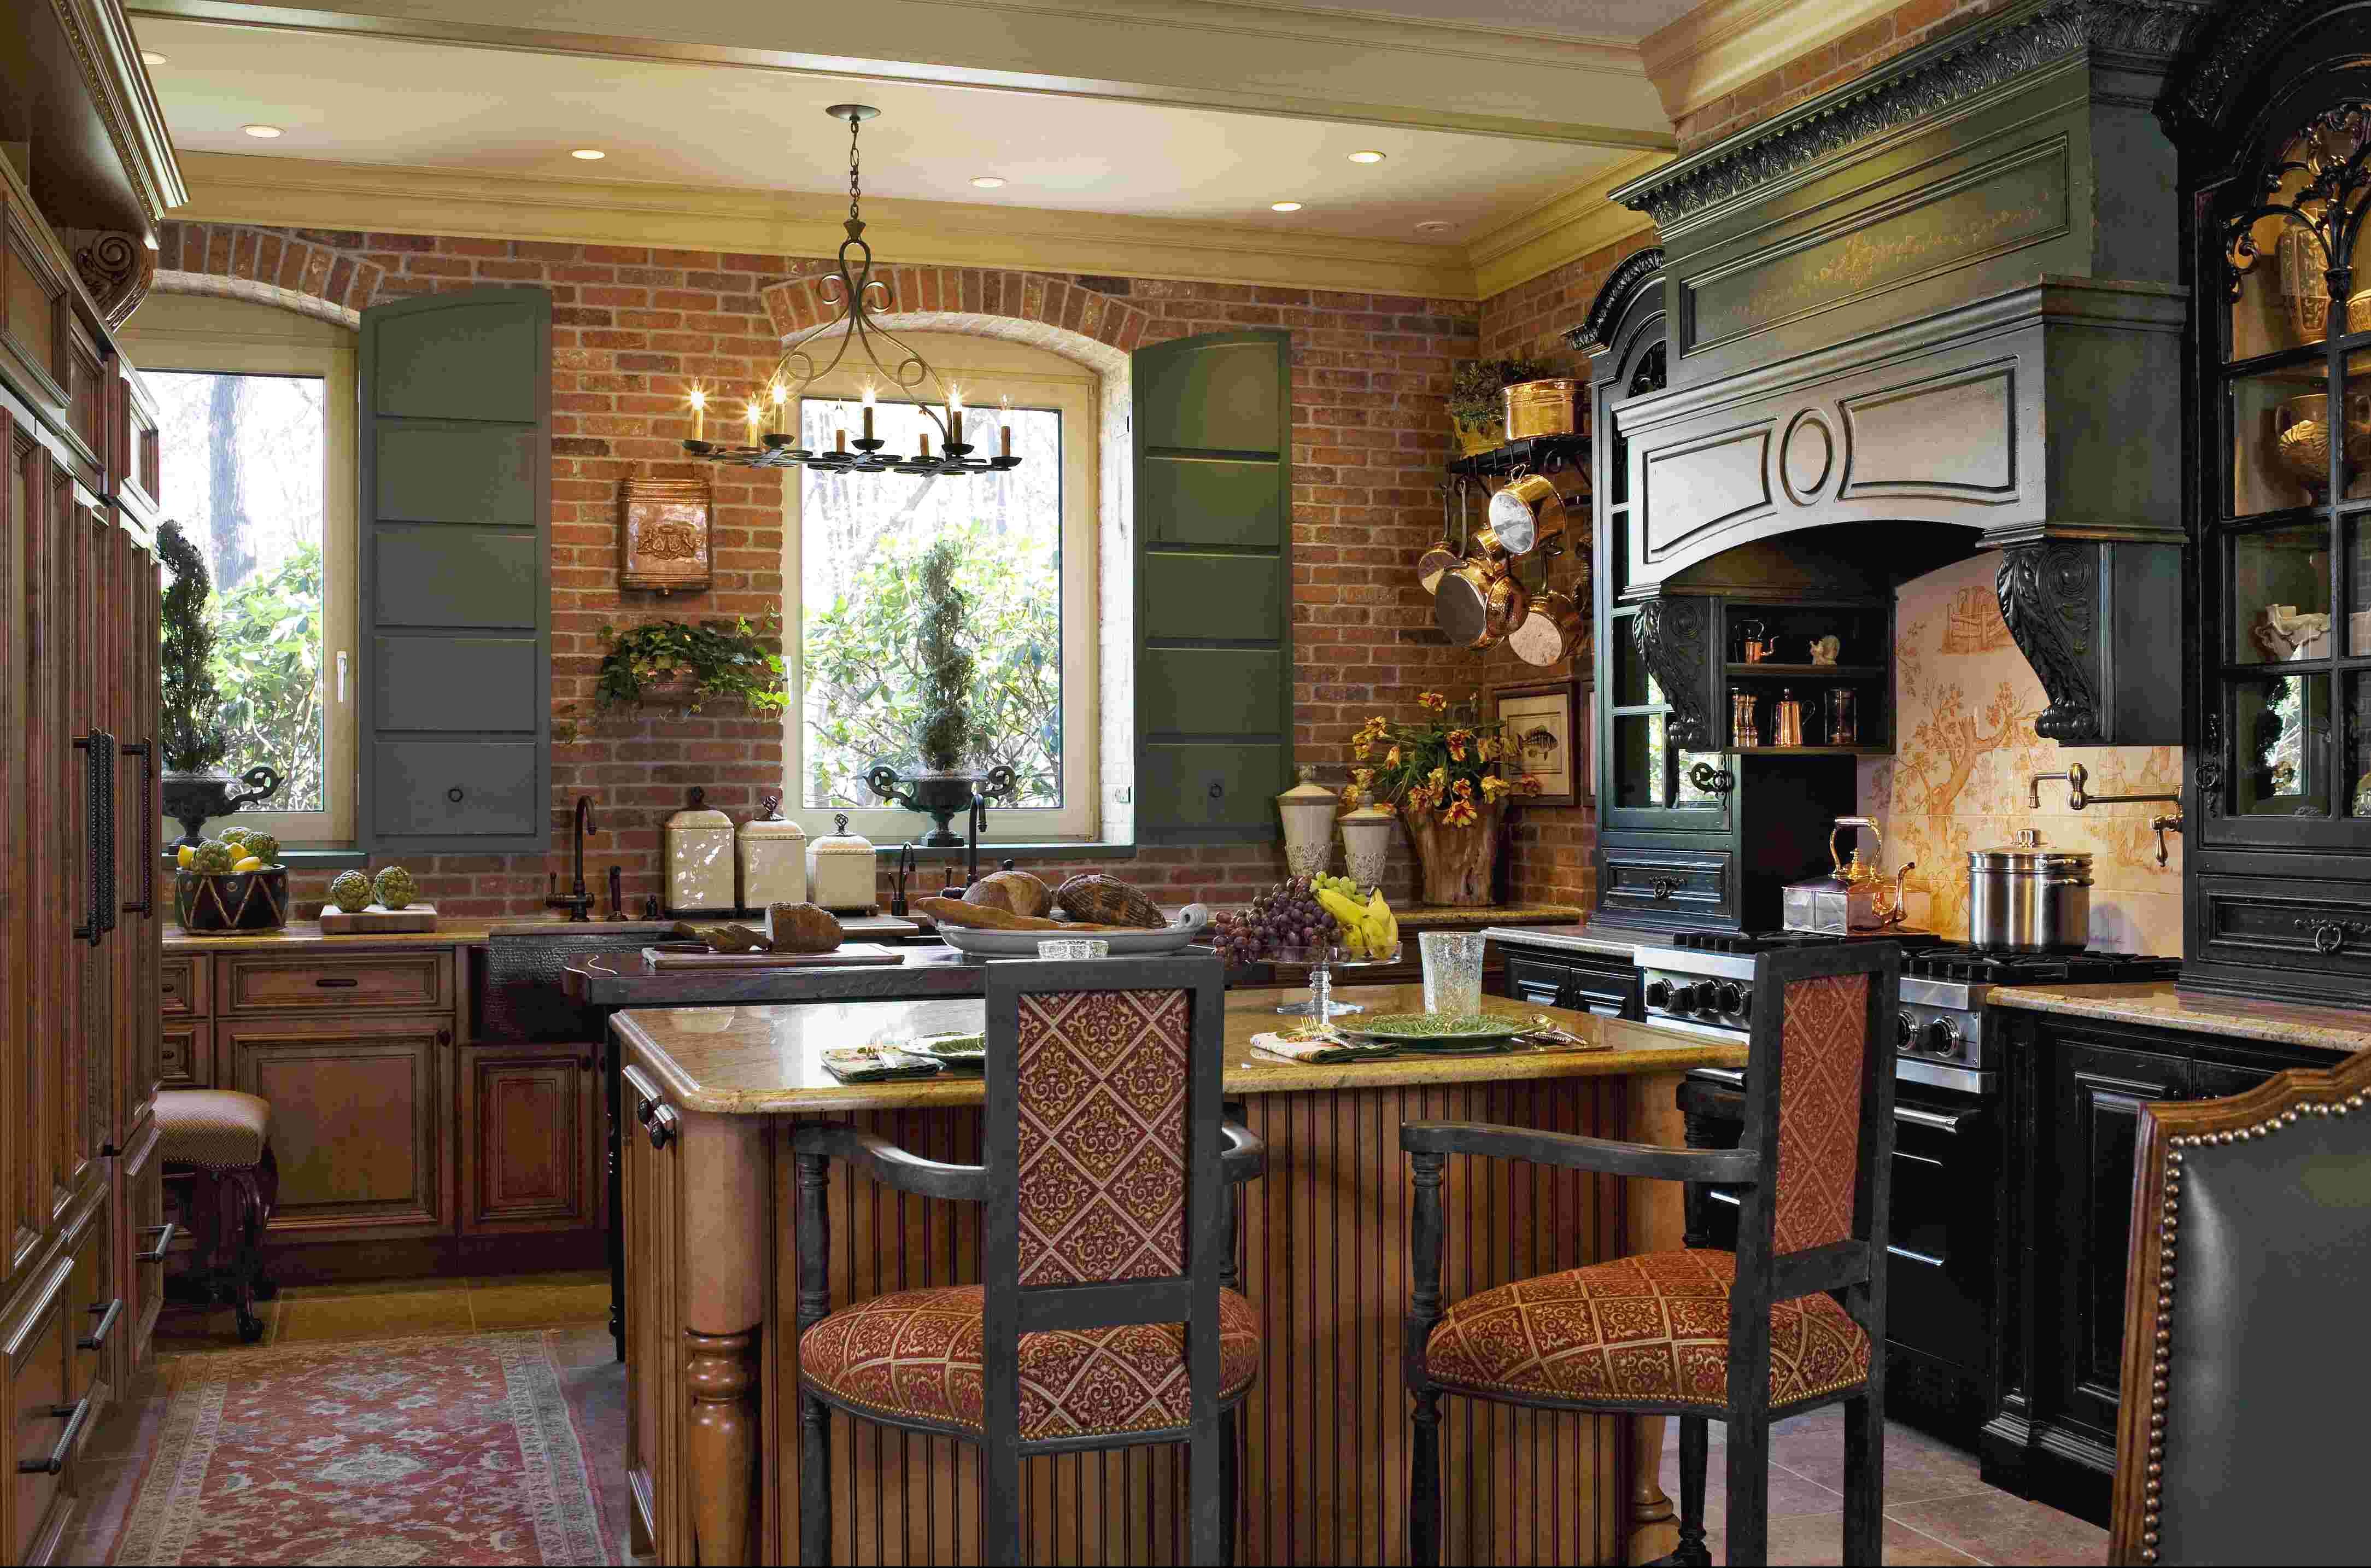 French Country Kitchen Wall Decor New fortable French Country Kitchen Warming Interior Space Traba Homes